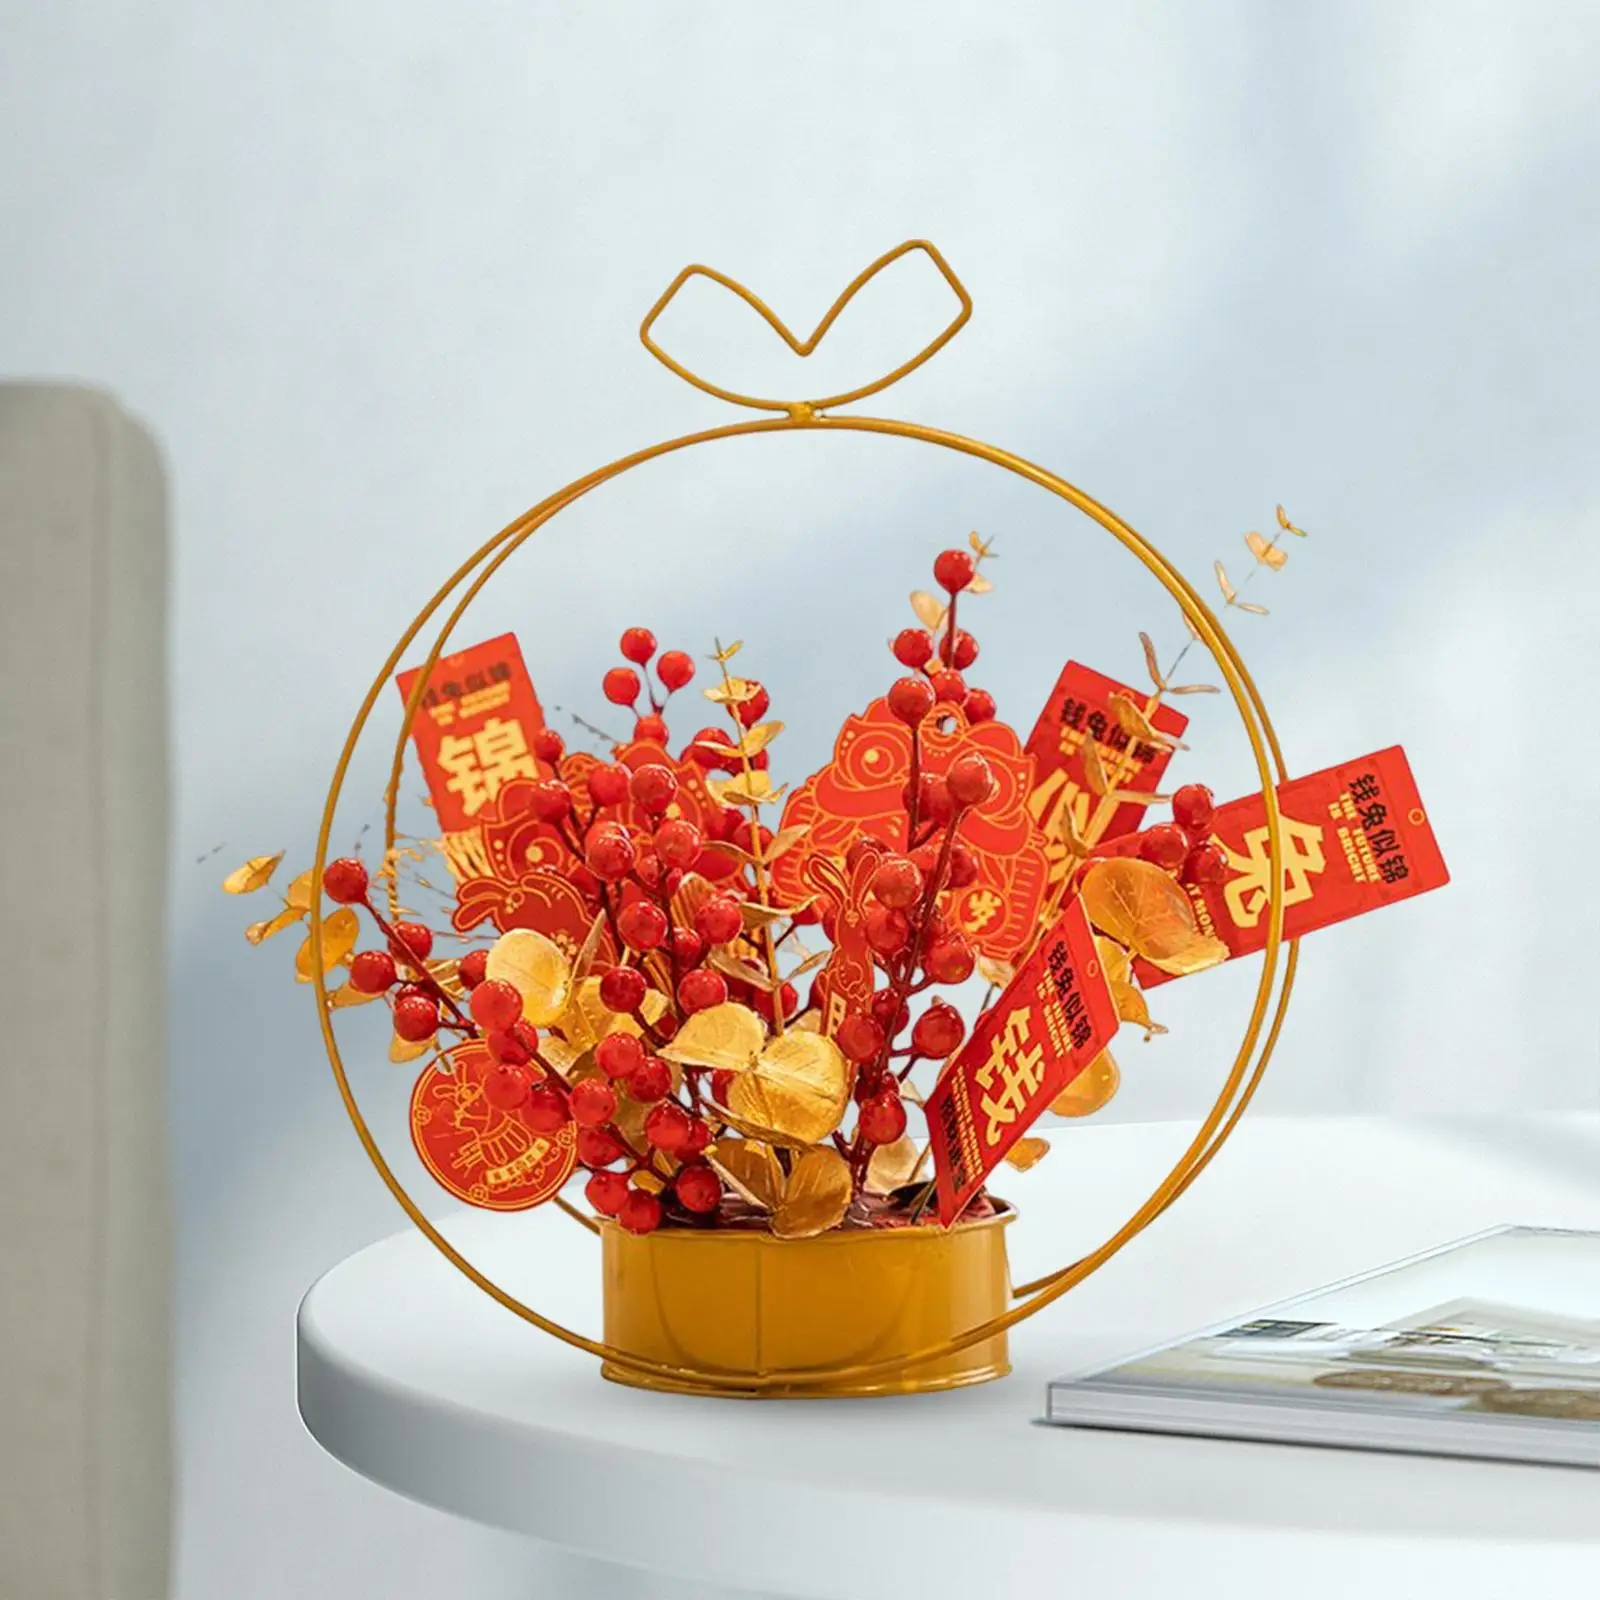 Chinese Flower Basket Ornament Spring Festival Photo Props New Year Decorative for Home Living Room Decor